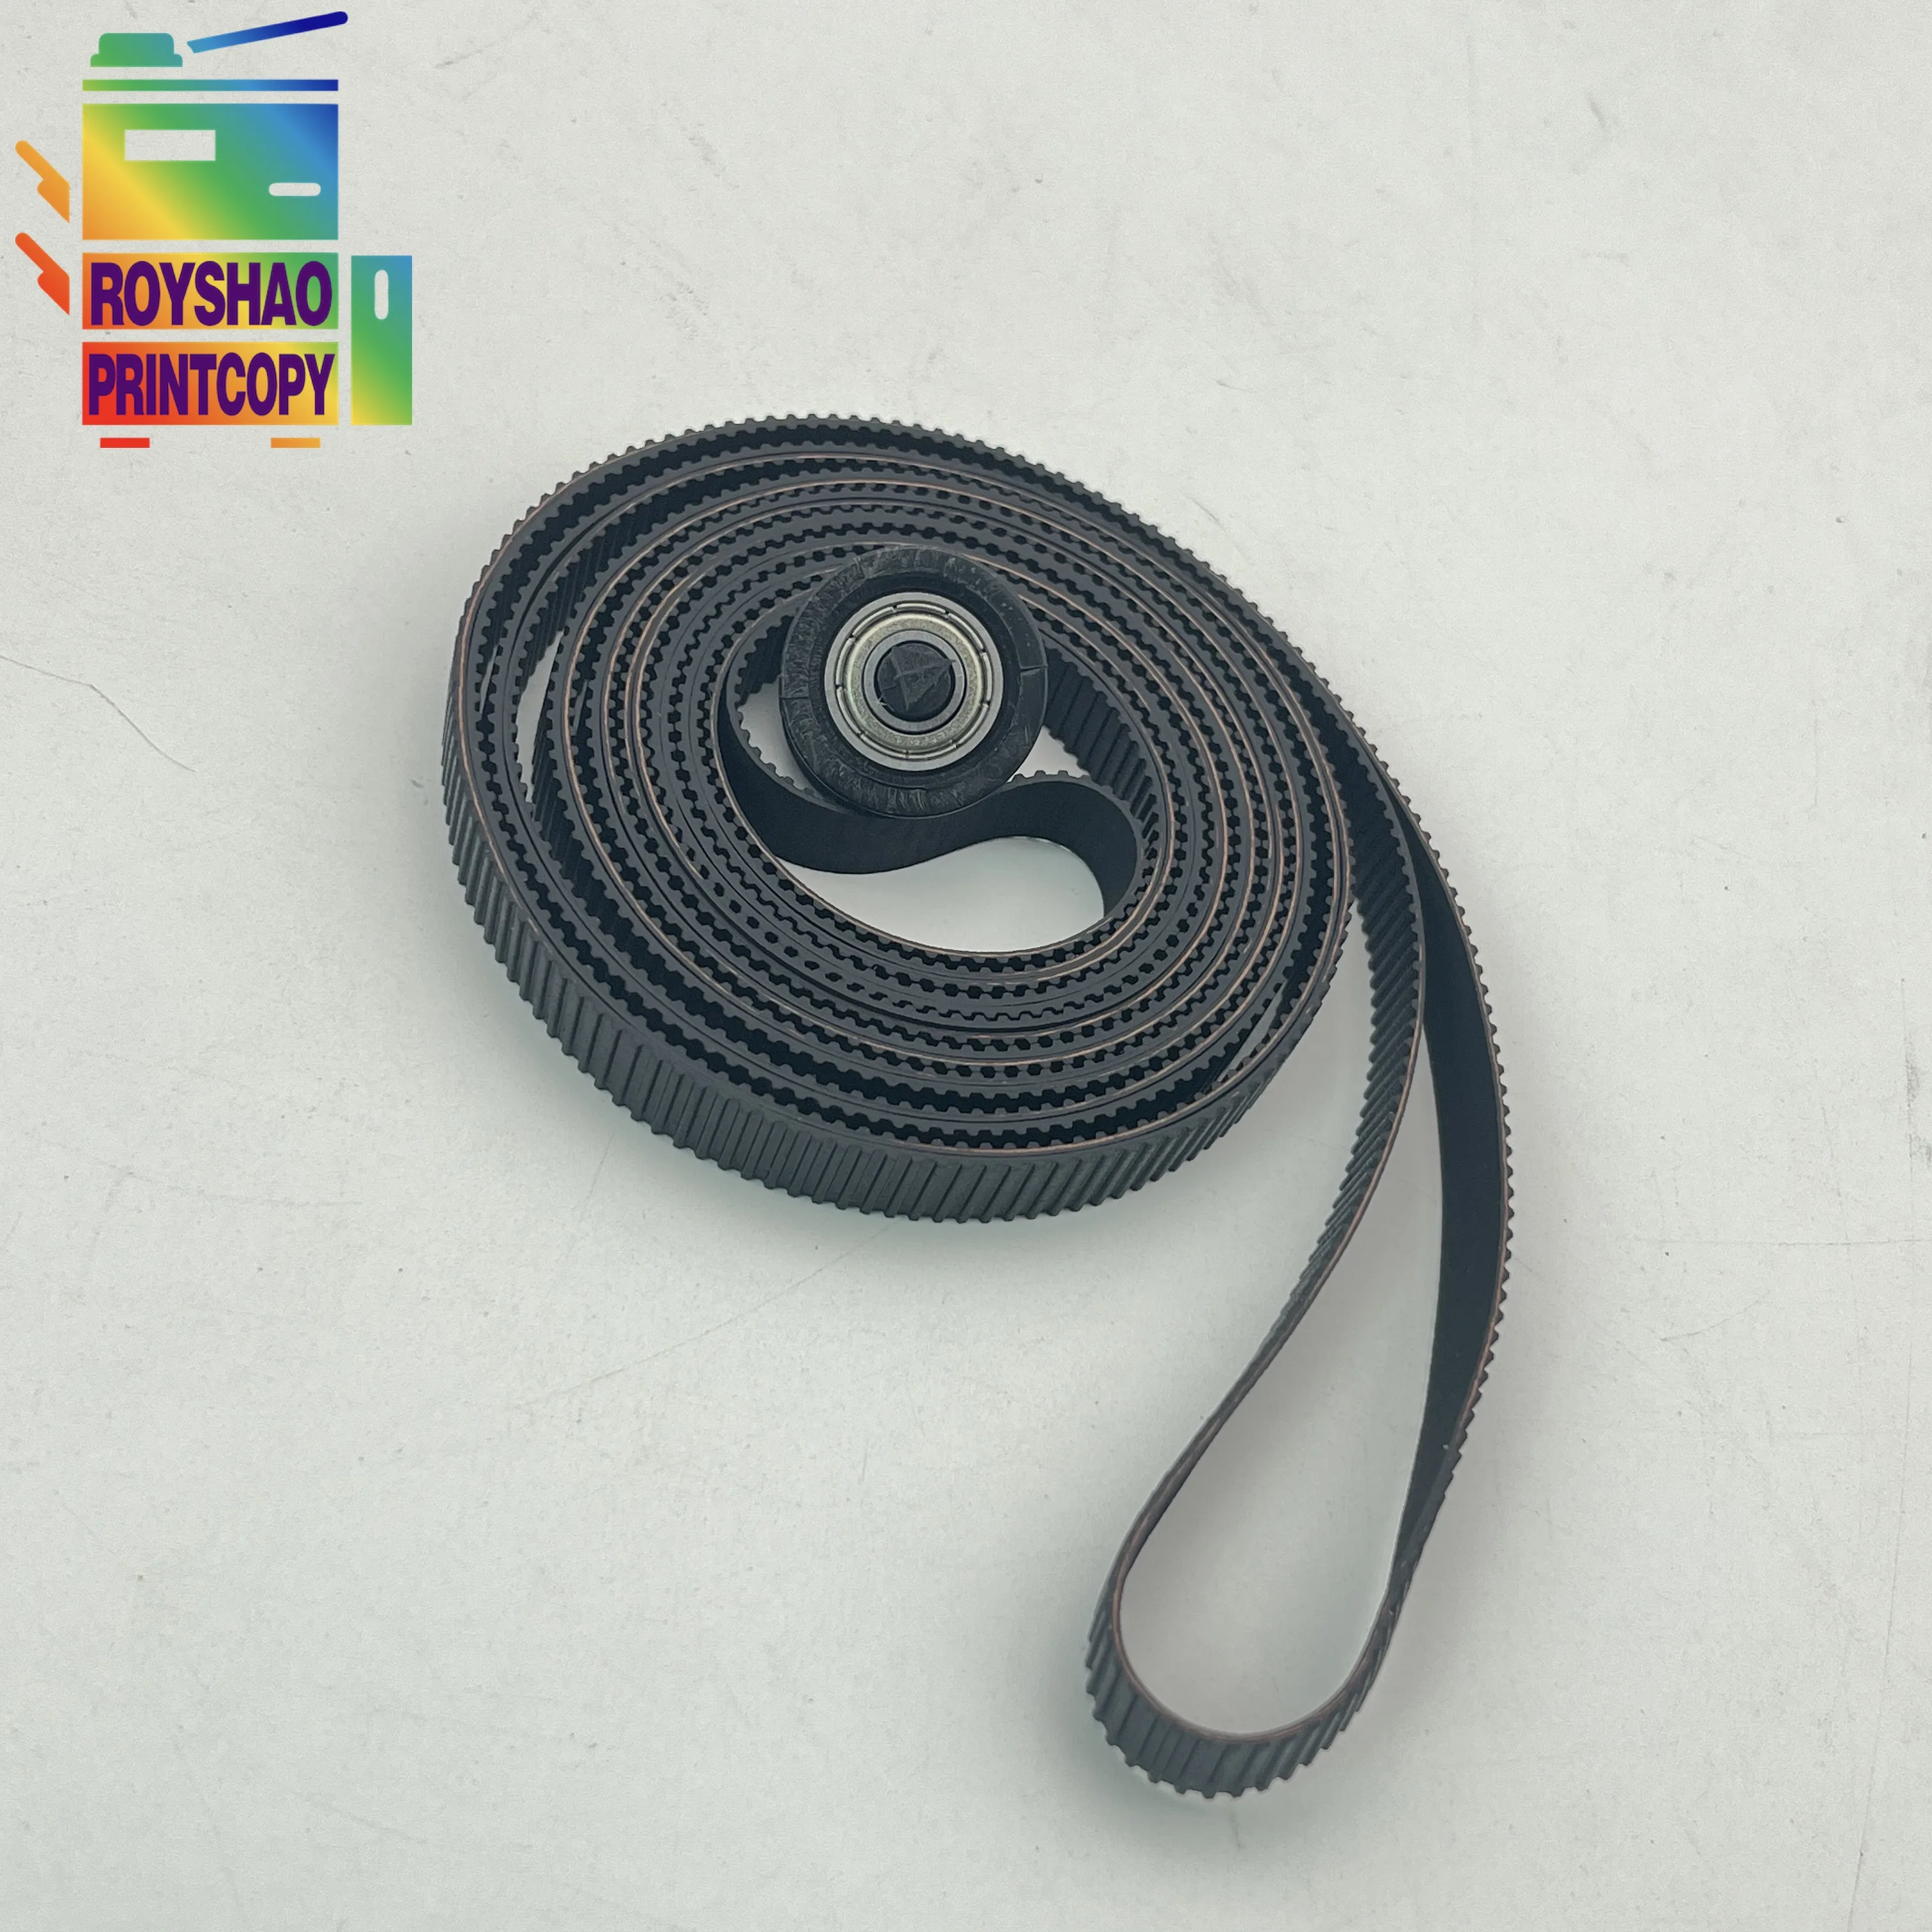 

C7770-60014 Carriage Belt 24inches 42inch For HP Designjet 500 500ps 510 800 800ps A0 A1 C7769-60182 C7769-9076